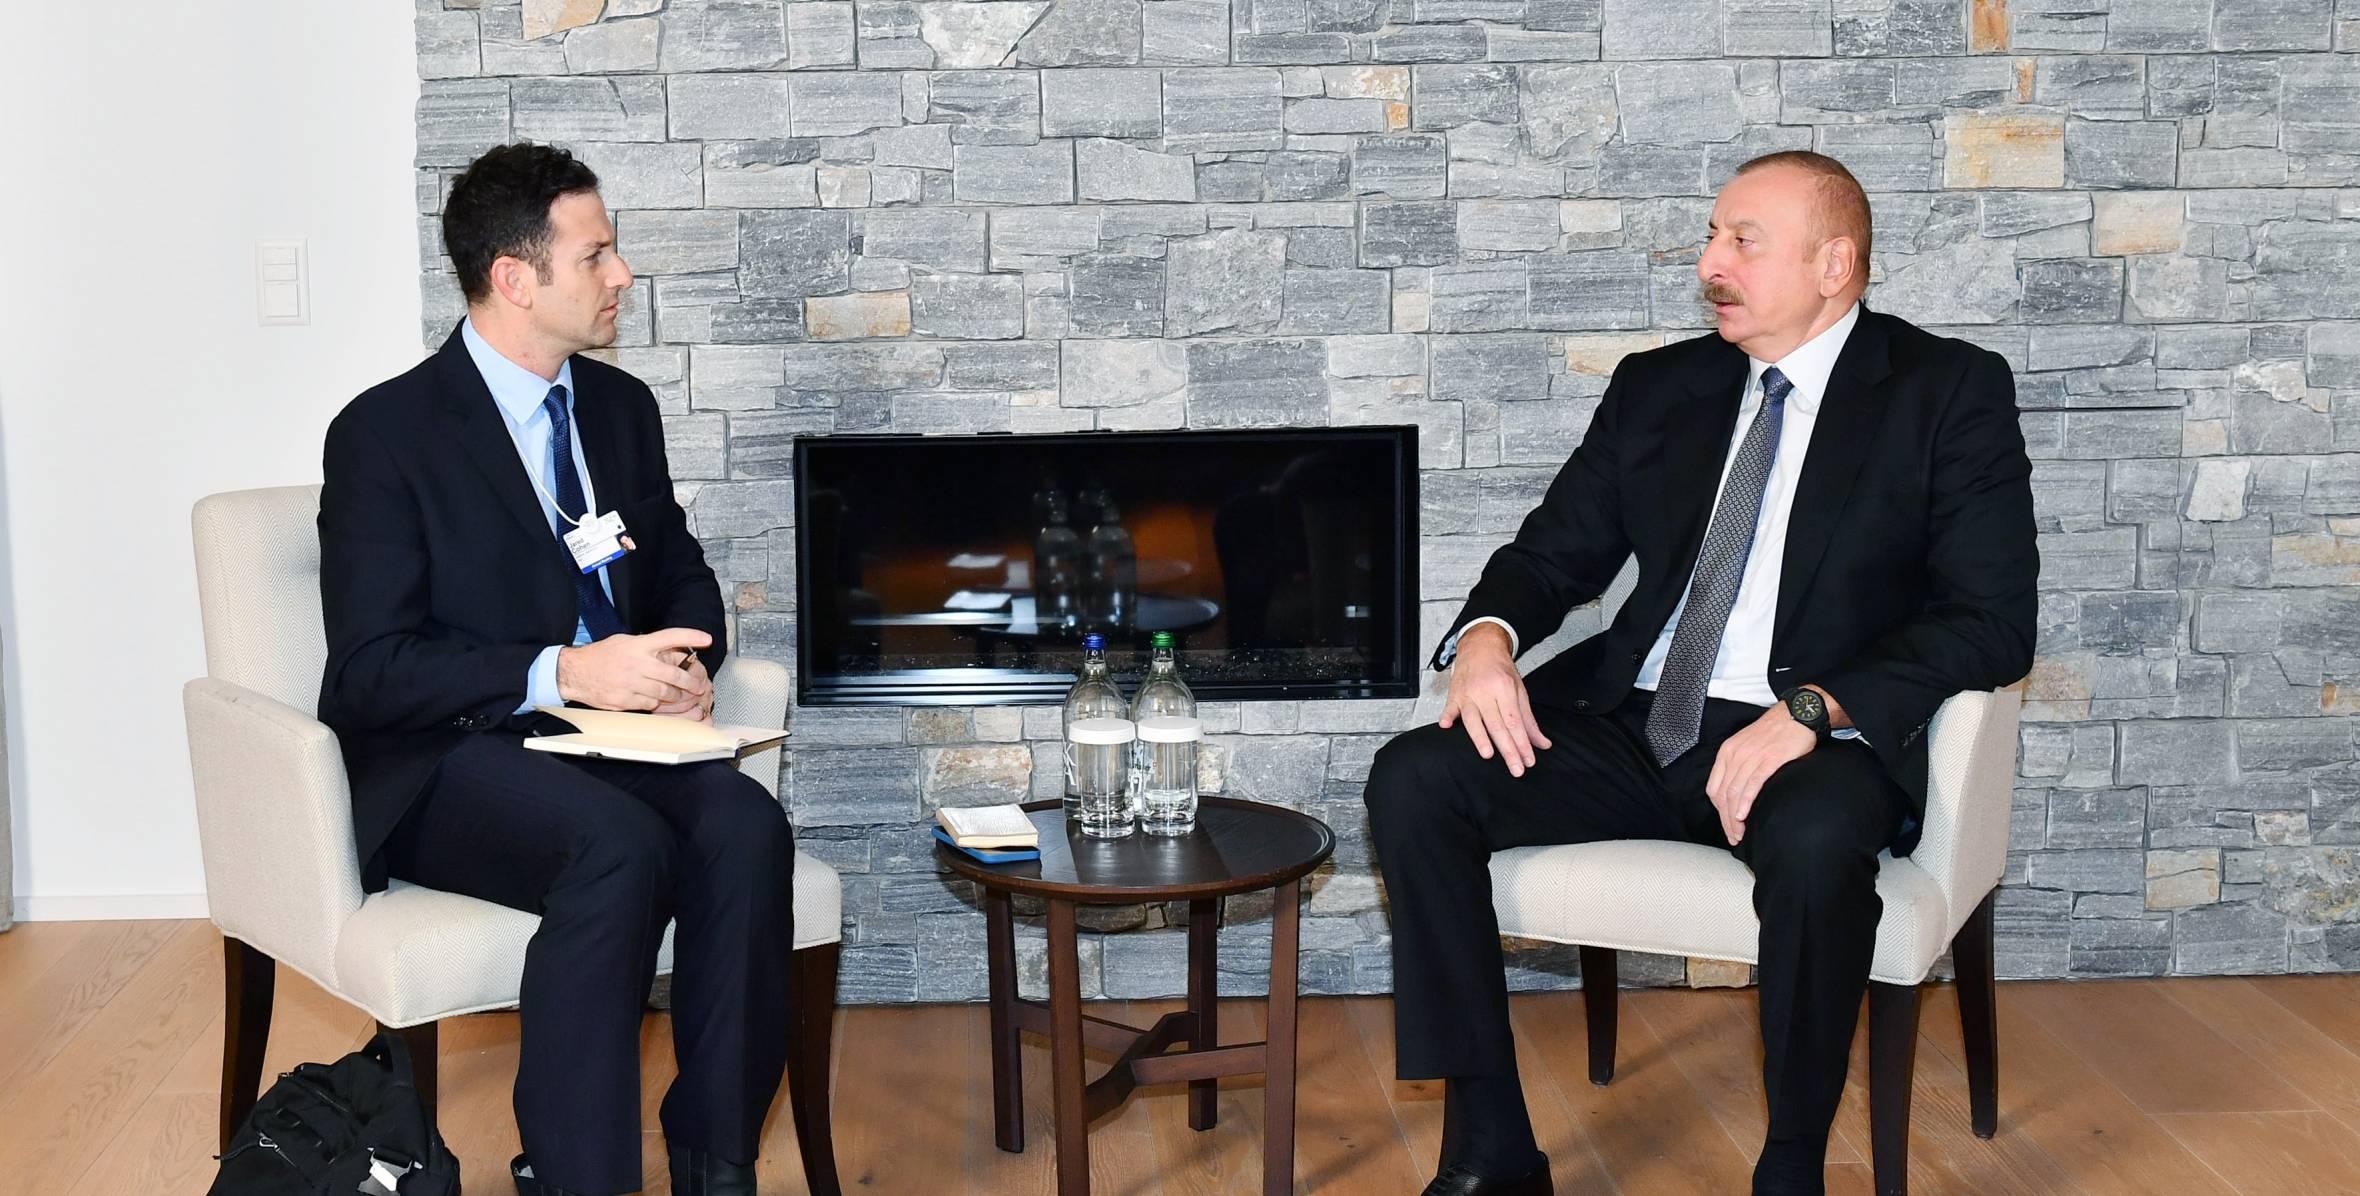 Ilham Aliyev met with President of Global Affairs at “The Goldman Sachs Group, Inc.” in Davos